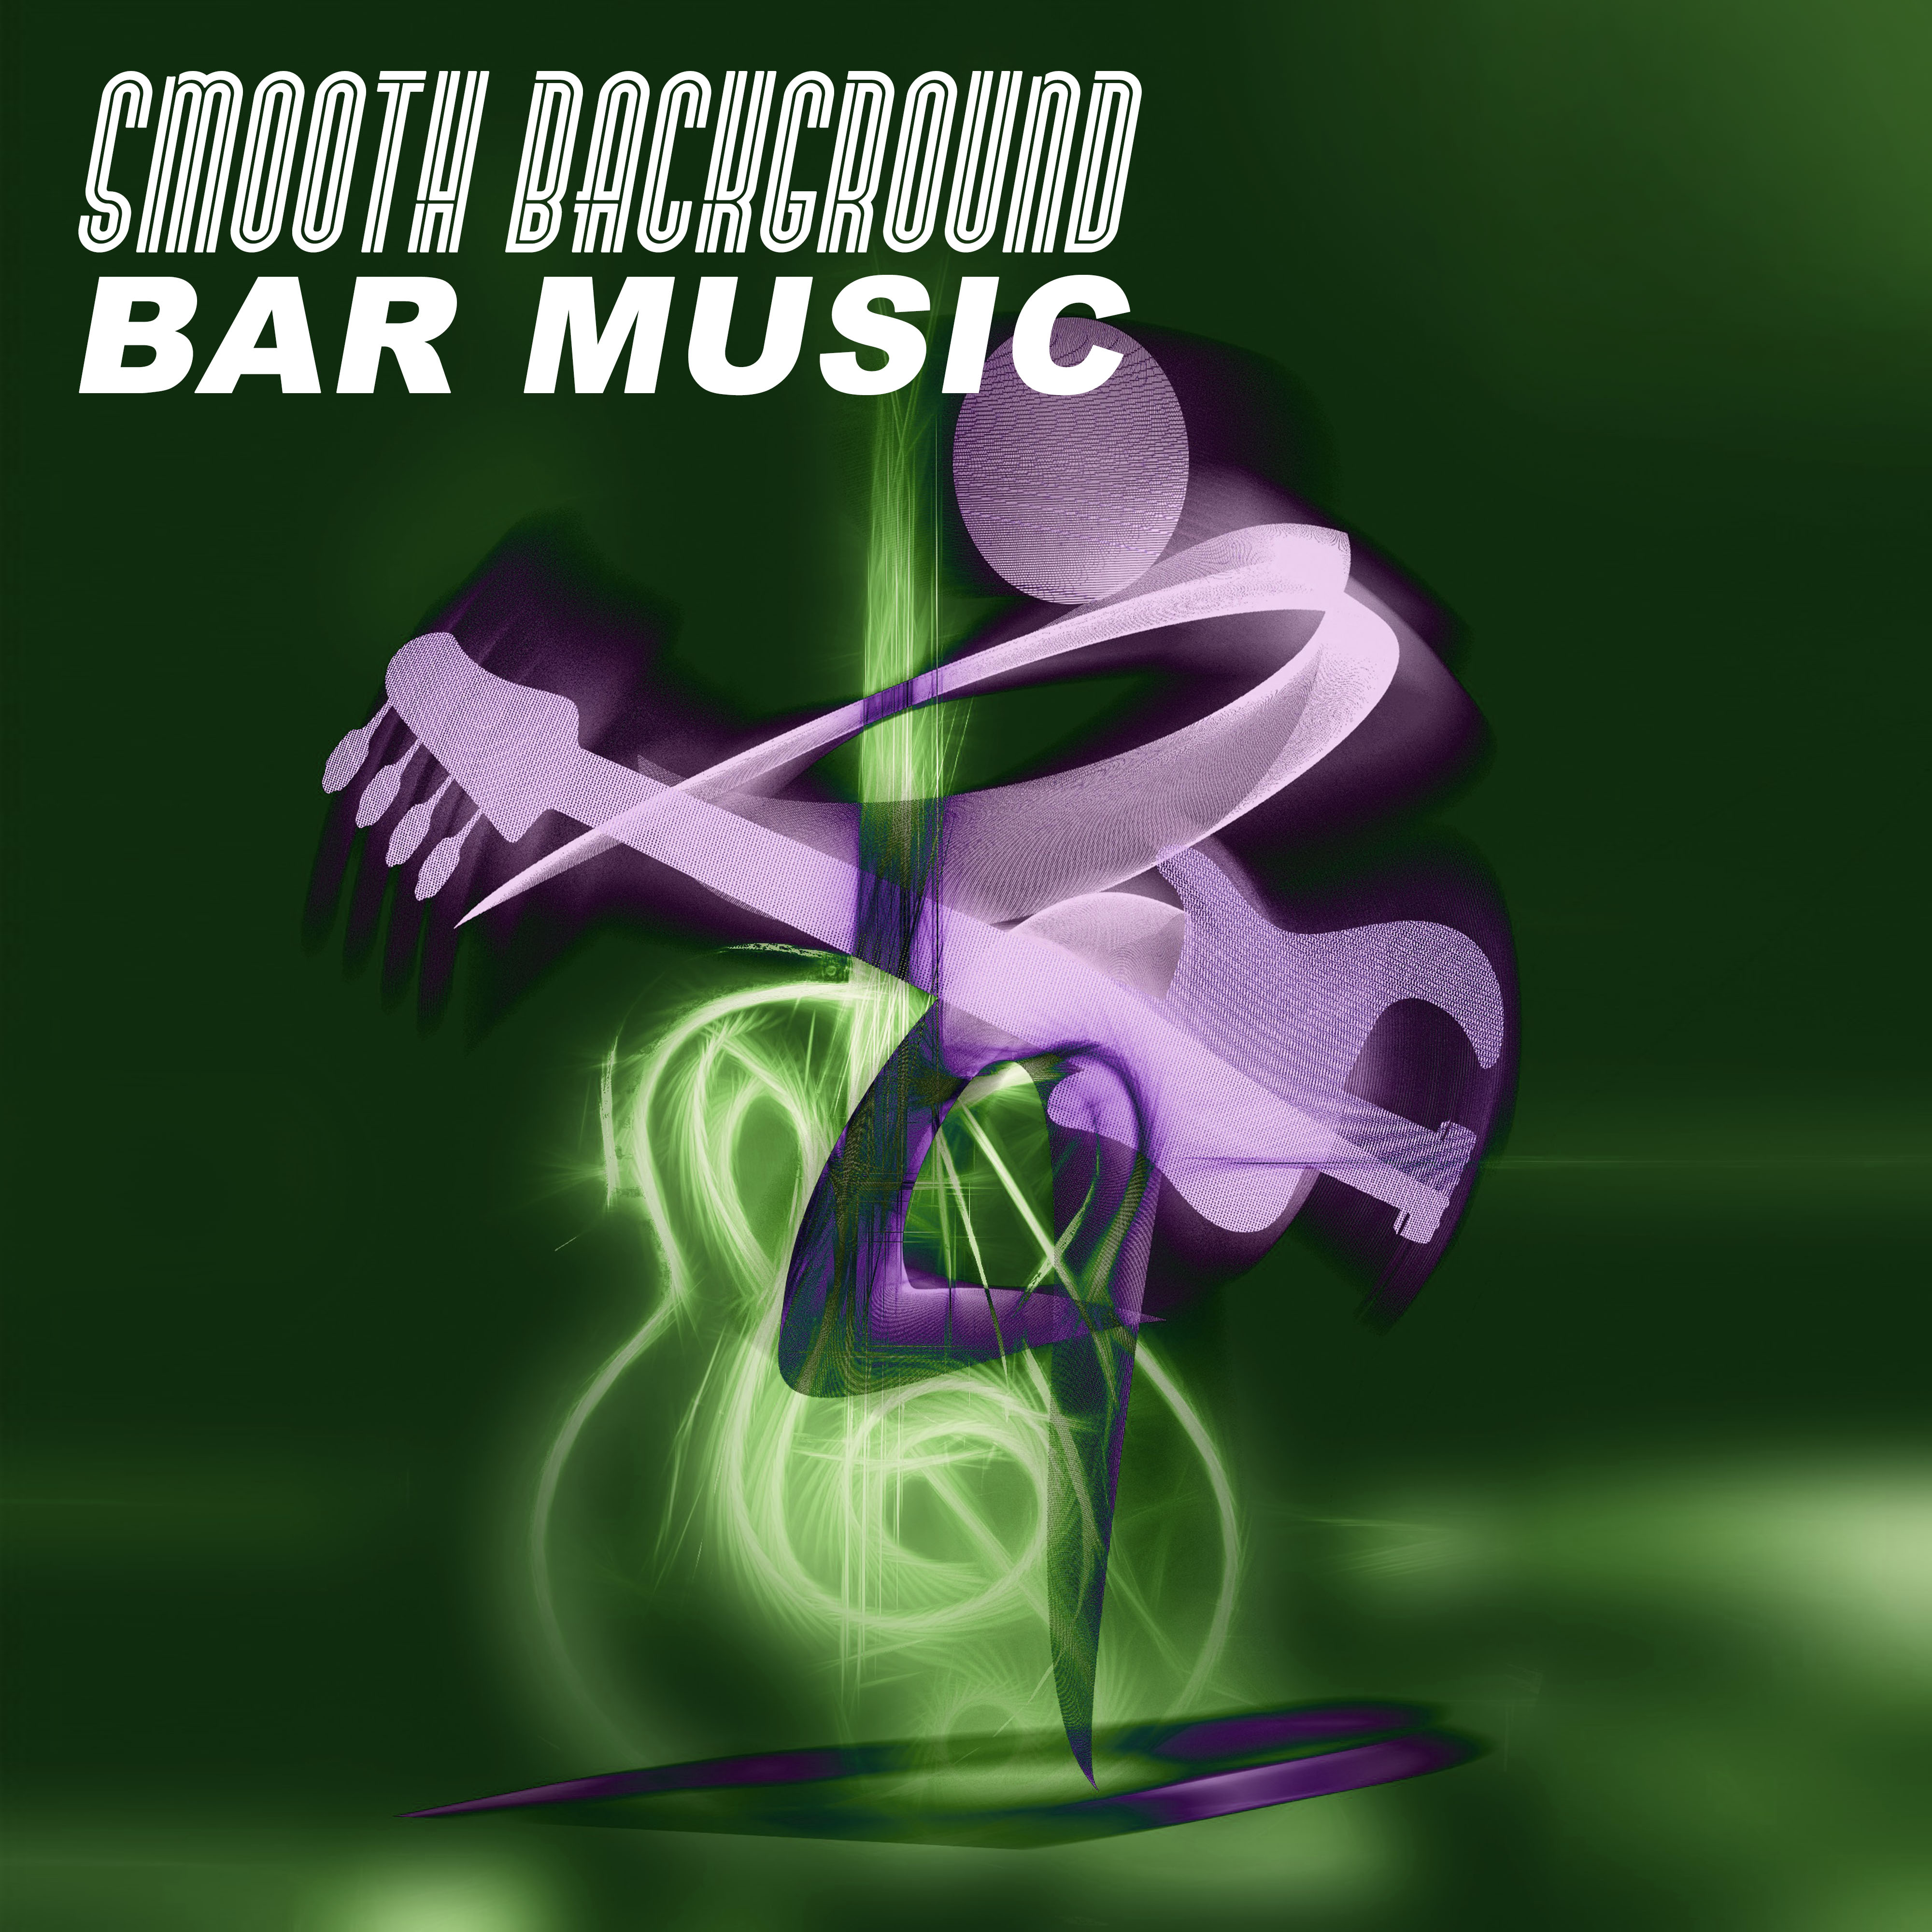 Smooth Background Bar Music – **** Mellow Jazz Music, Instrumental Grooves, Cocktails and Soft Drinks